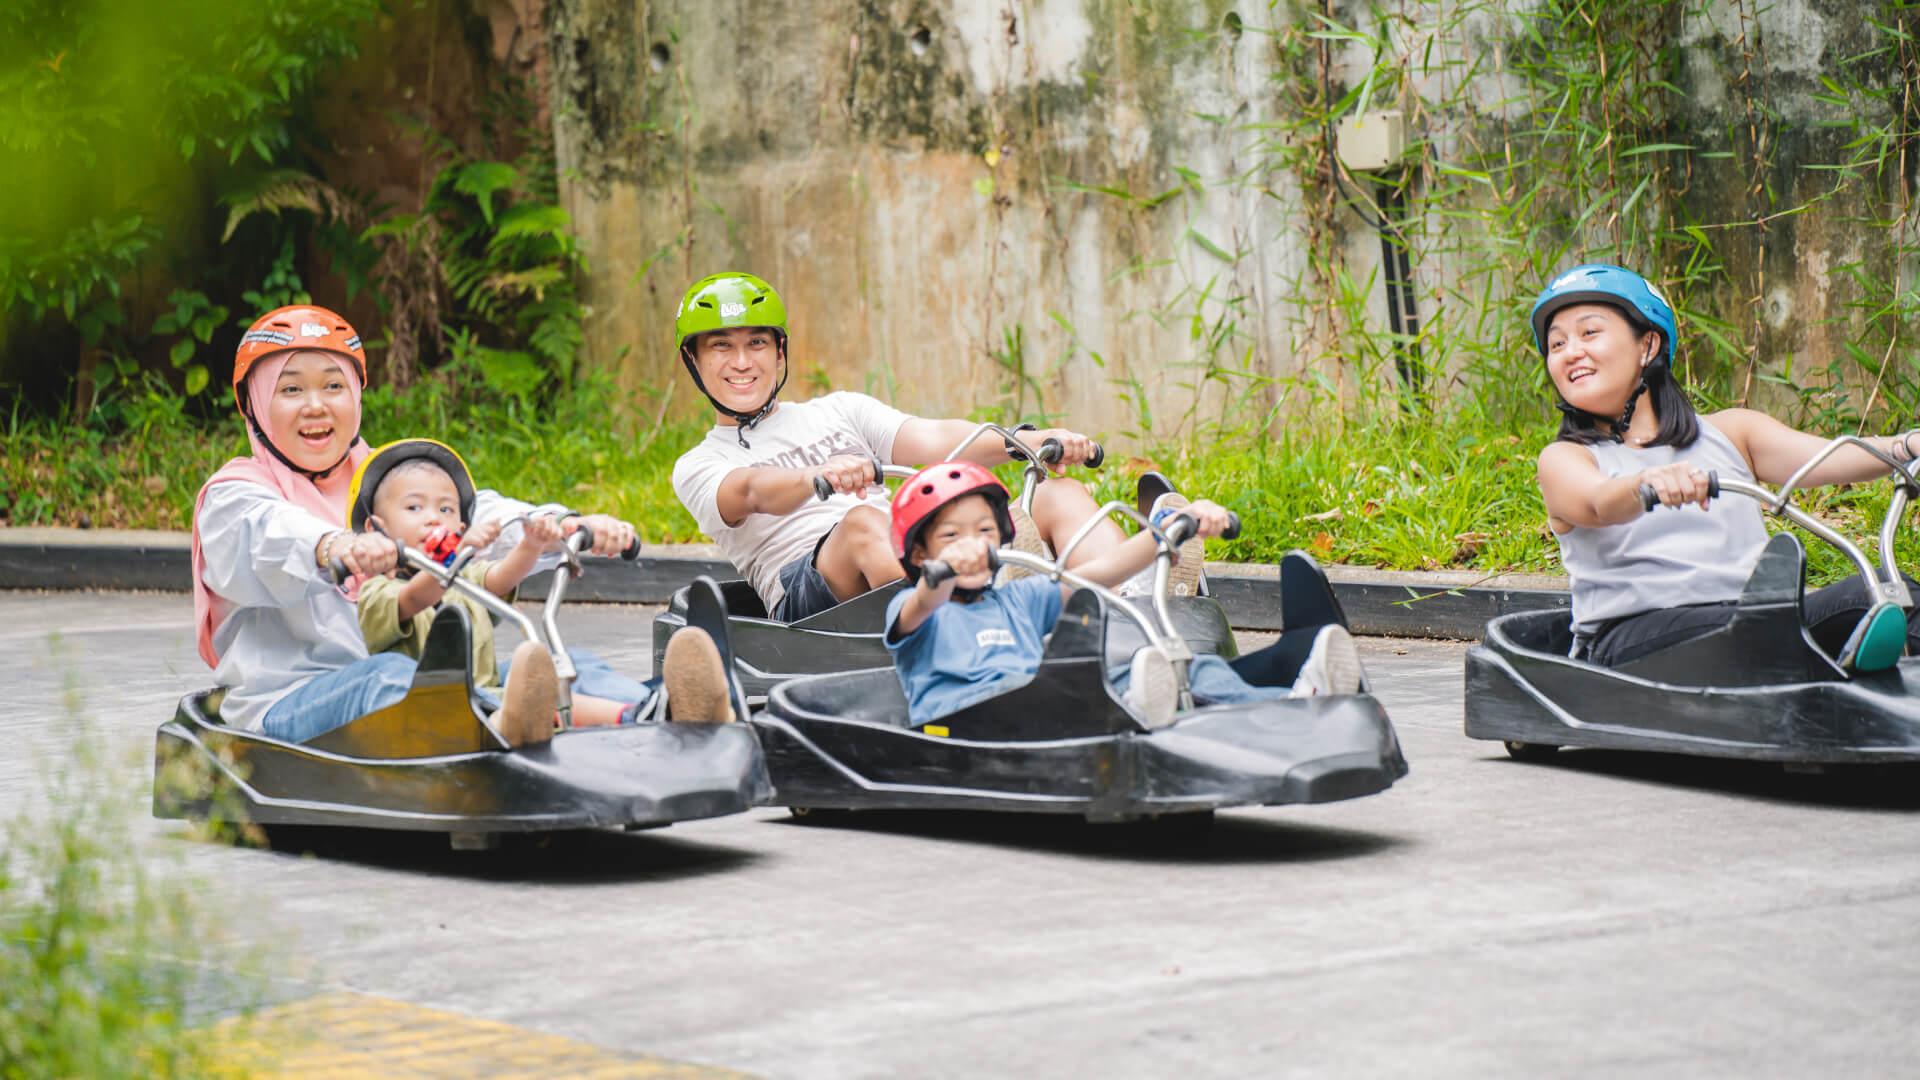 A family group rides down the tracks together with children riding in the same cart as an adult and one riding by himself.